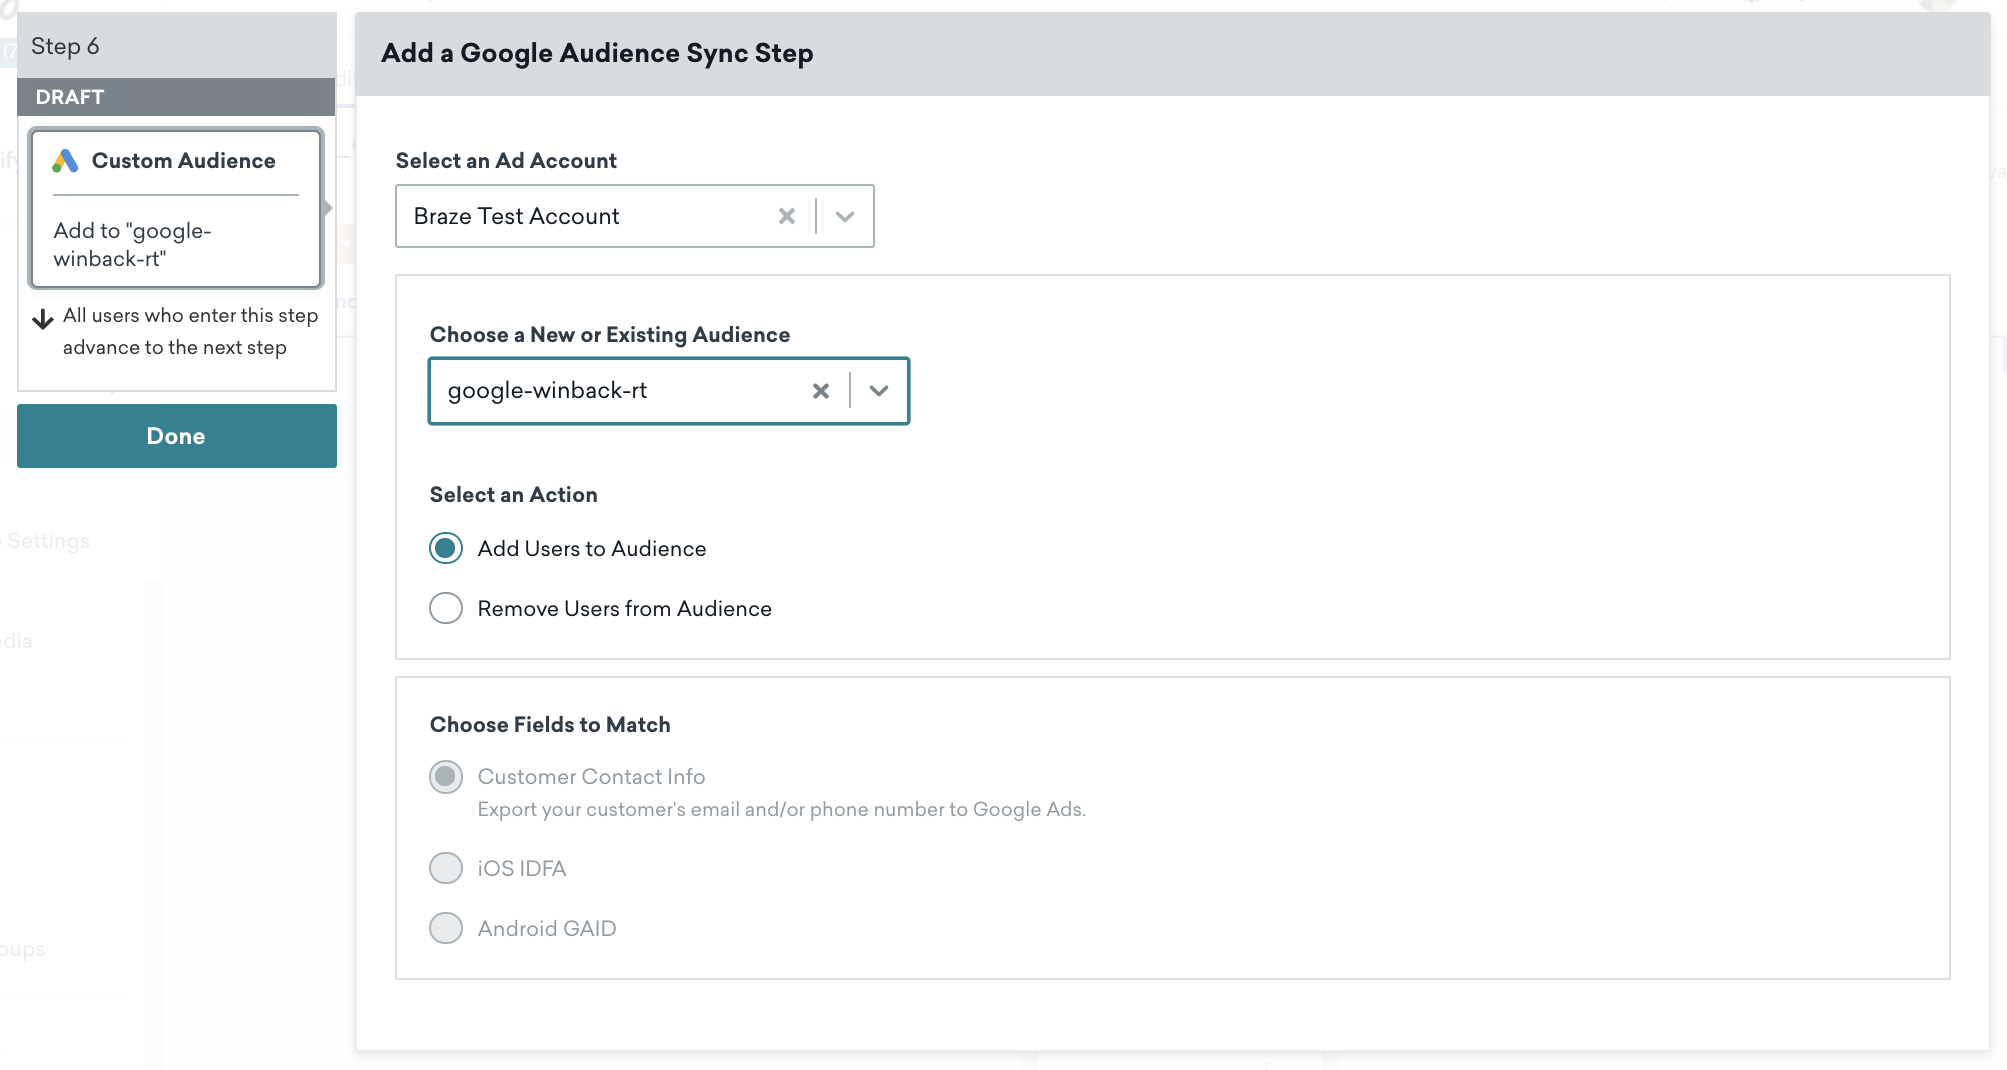 Expanded view of the Custom Audience Canvas step. Here, the desired Ad account and existing audience is selected, as well as the "Add user to Audience" radio button.